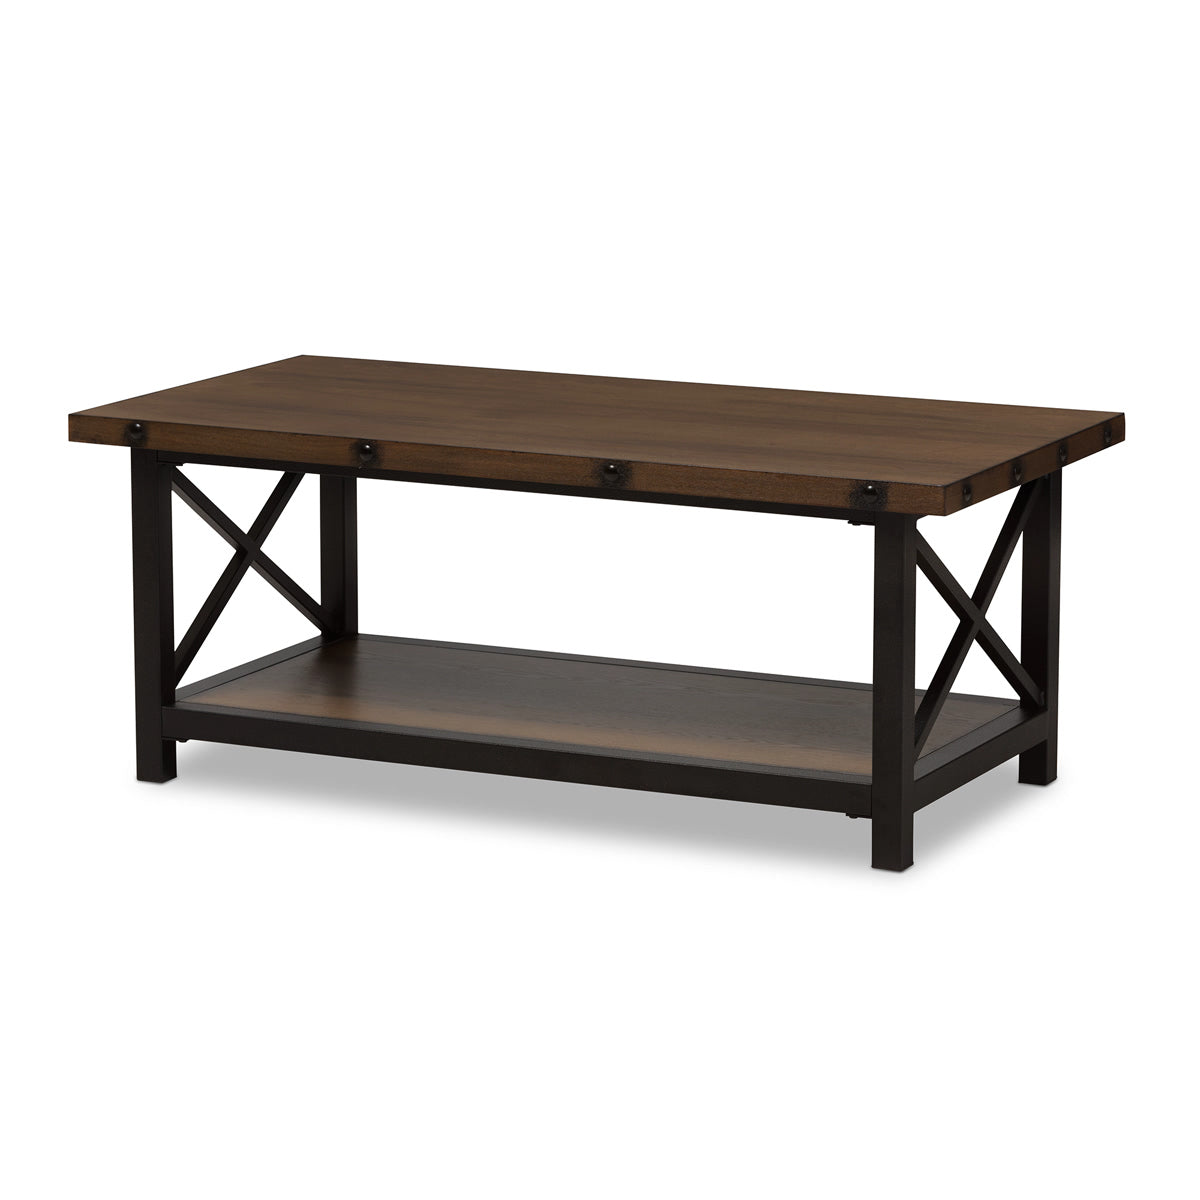 Baxton Studio Herzen Rustic Industrial Style Antique Black Textured Finished Metal Distressed Wood Occasional Cocktail Coffee Table Baxton Studio-coffee tables-Minimal And Modern - 2